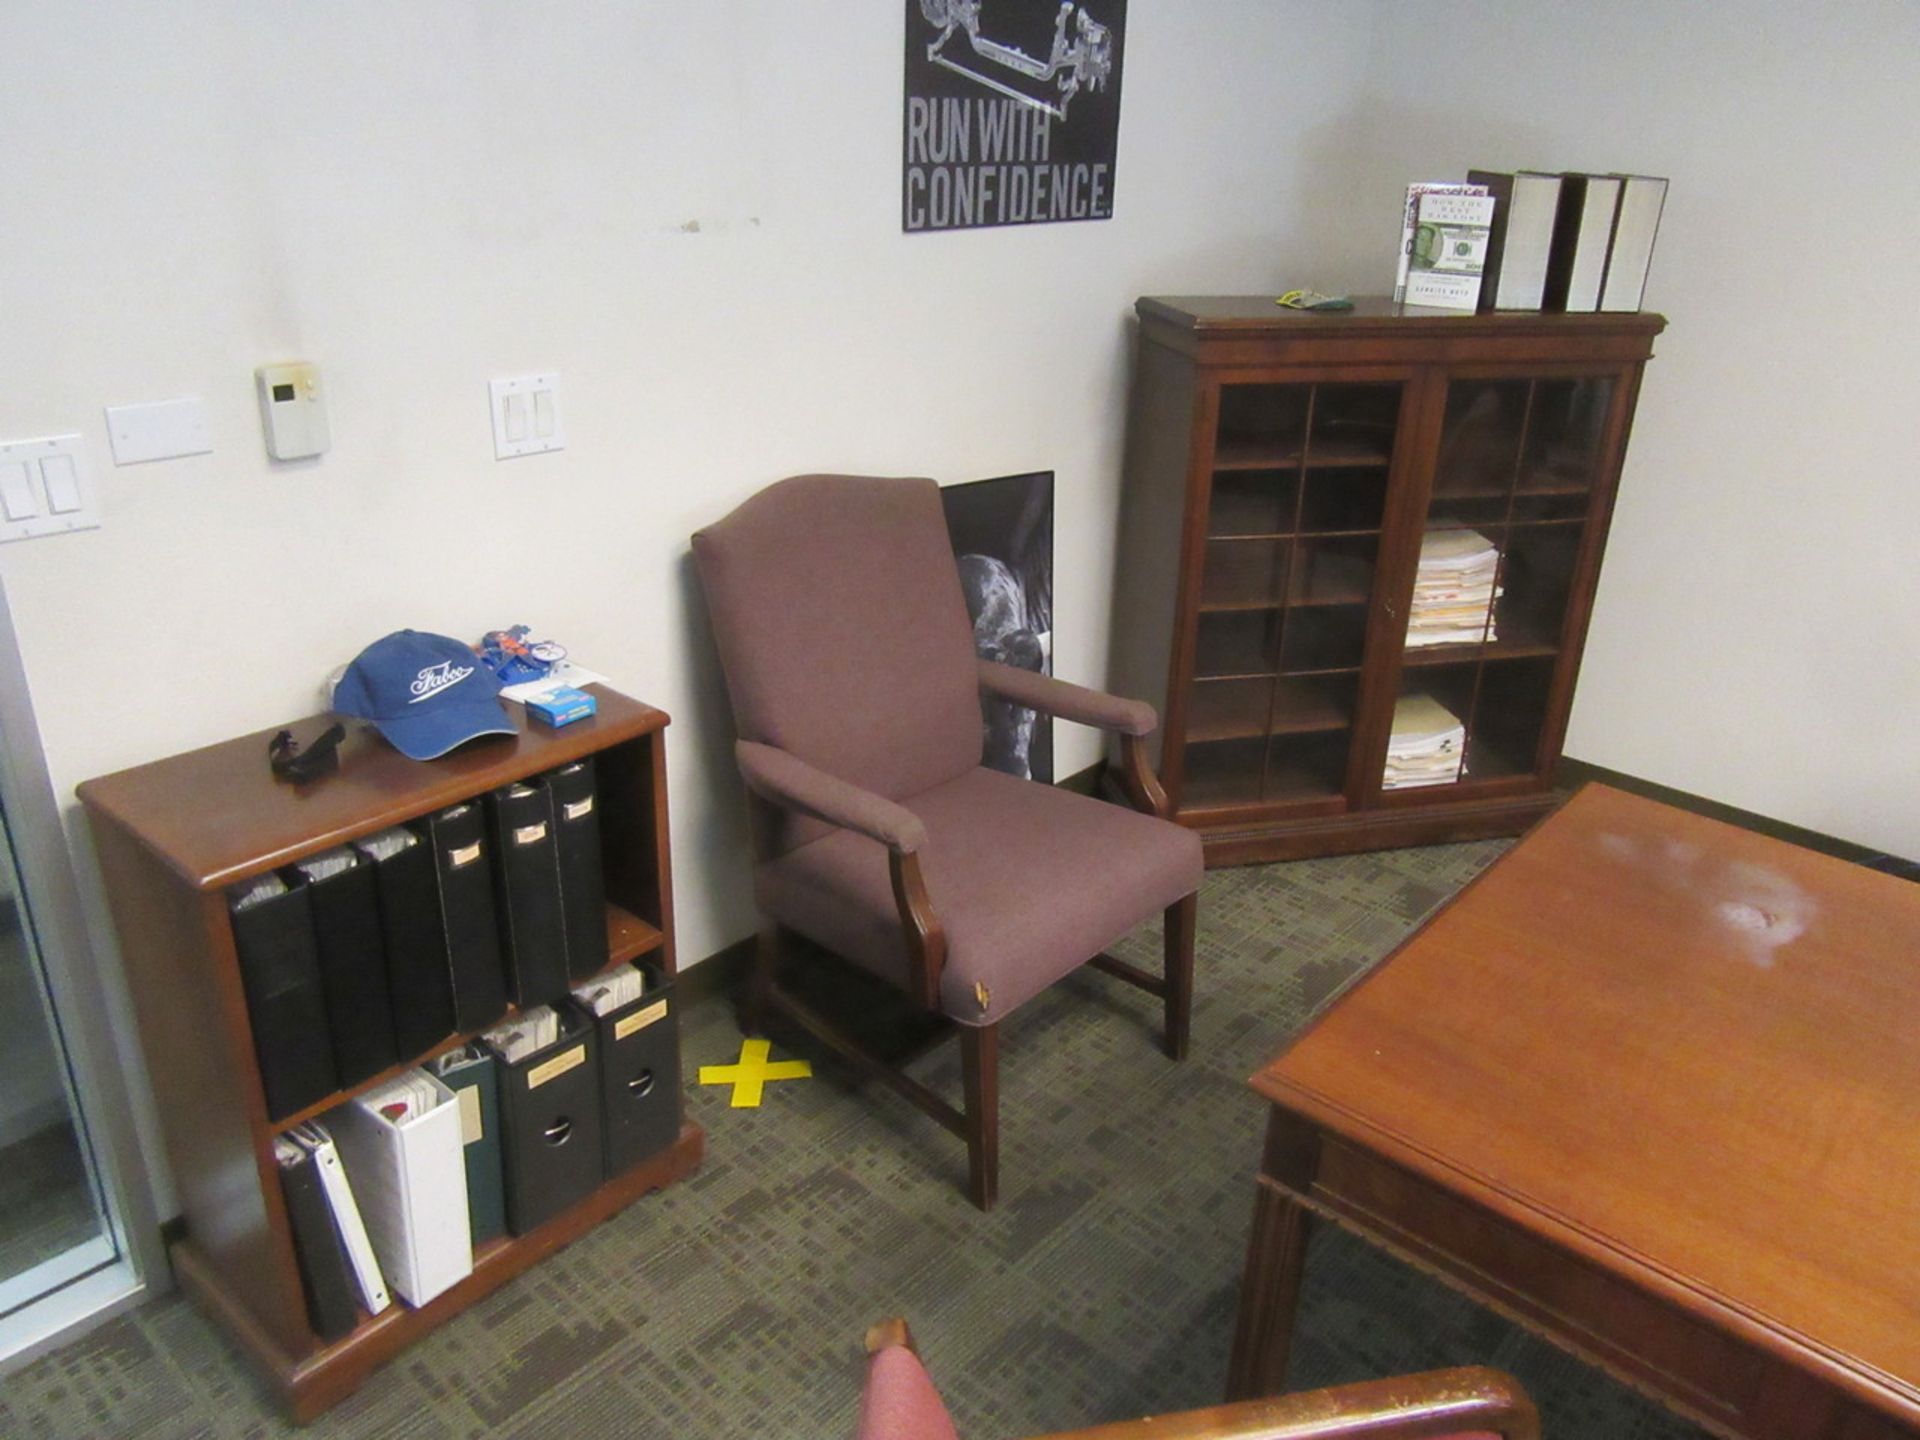 Contents of Office - Image 2 of 2